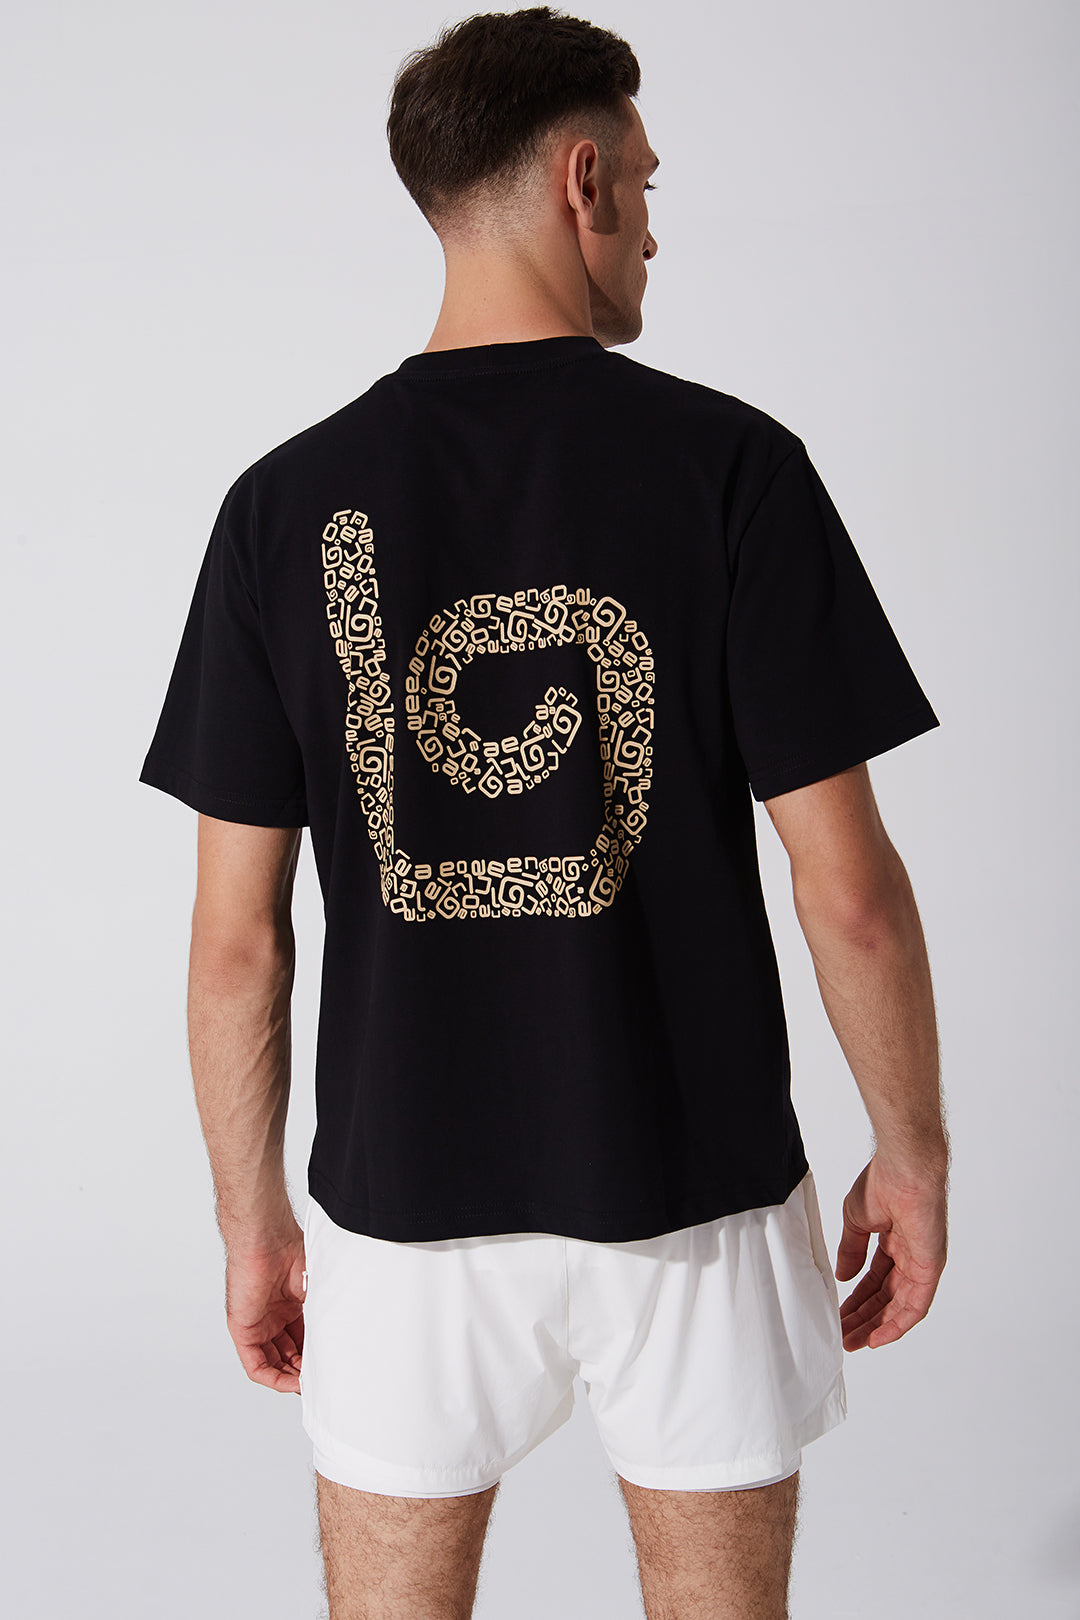 Unisex black short sleeve tee with limited edition design - OW-0174-MSS-BK.